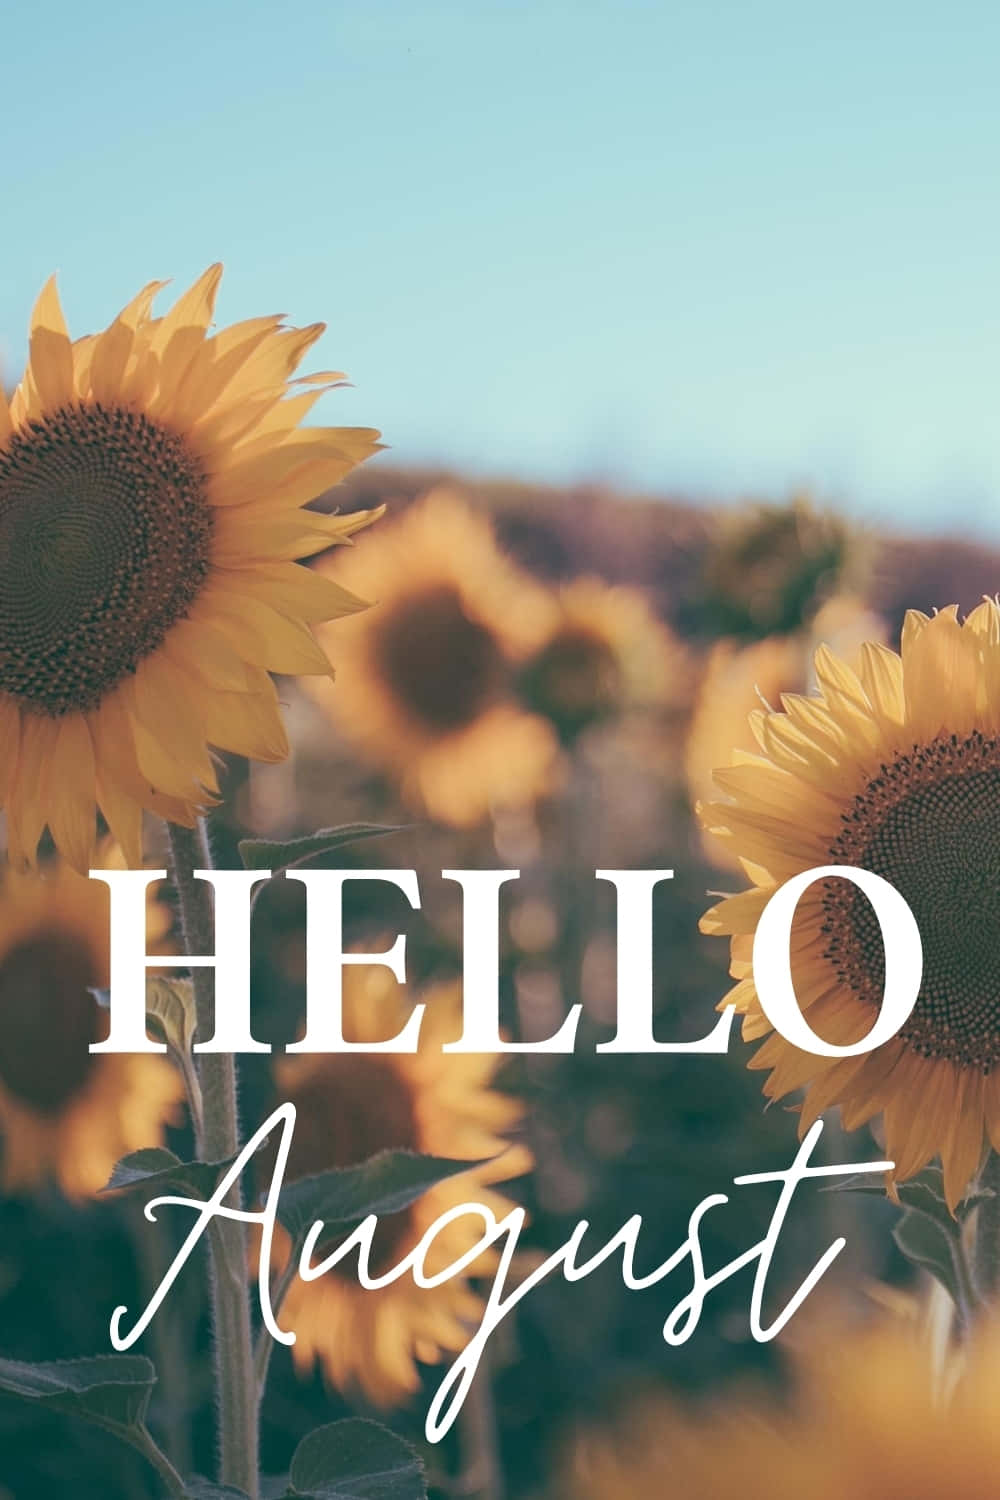 Enjoy the beauty of August